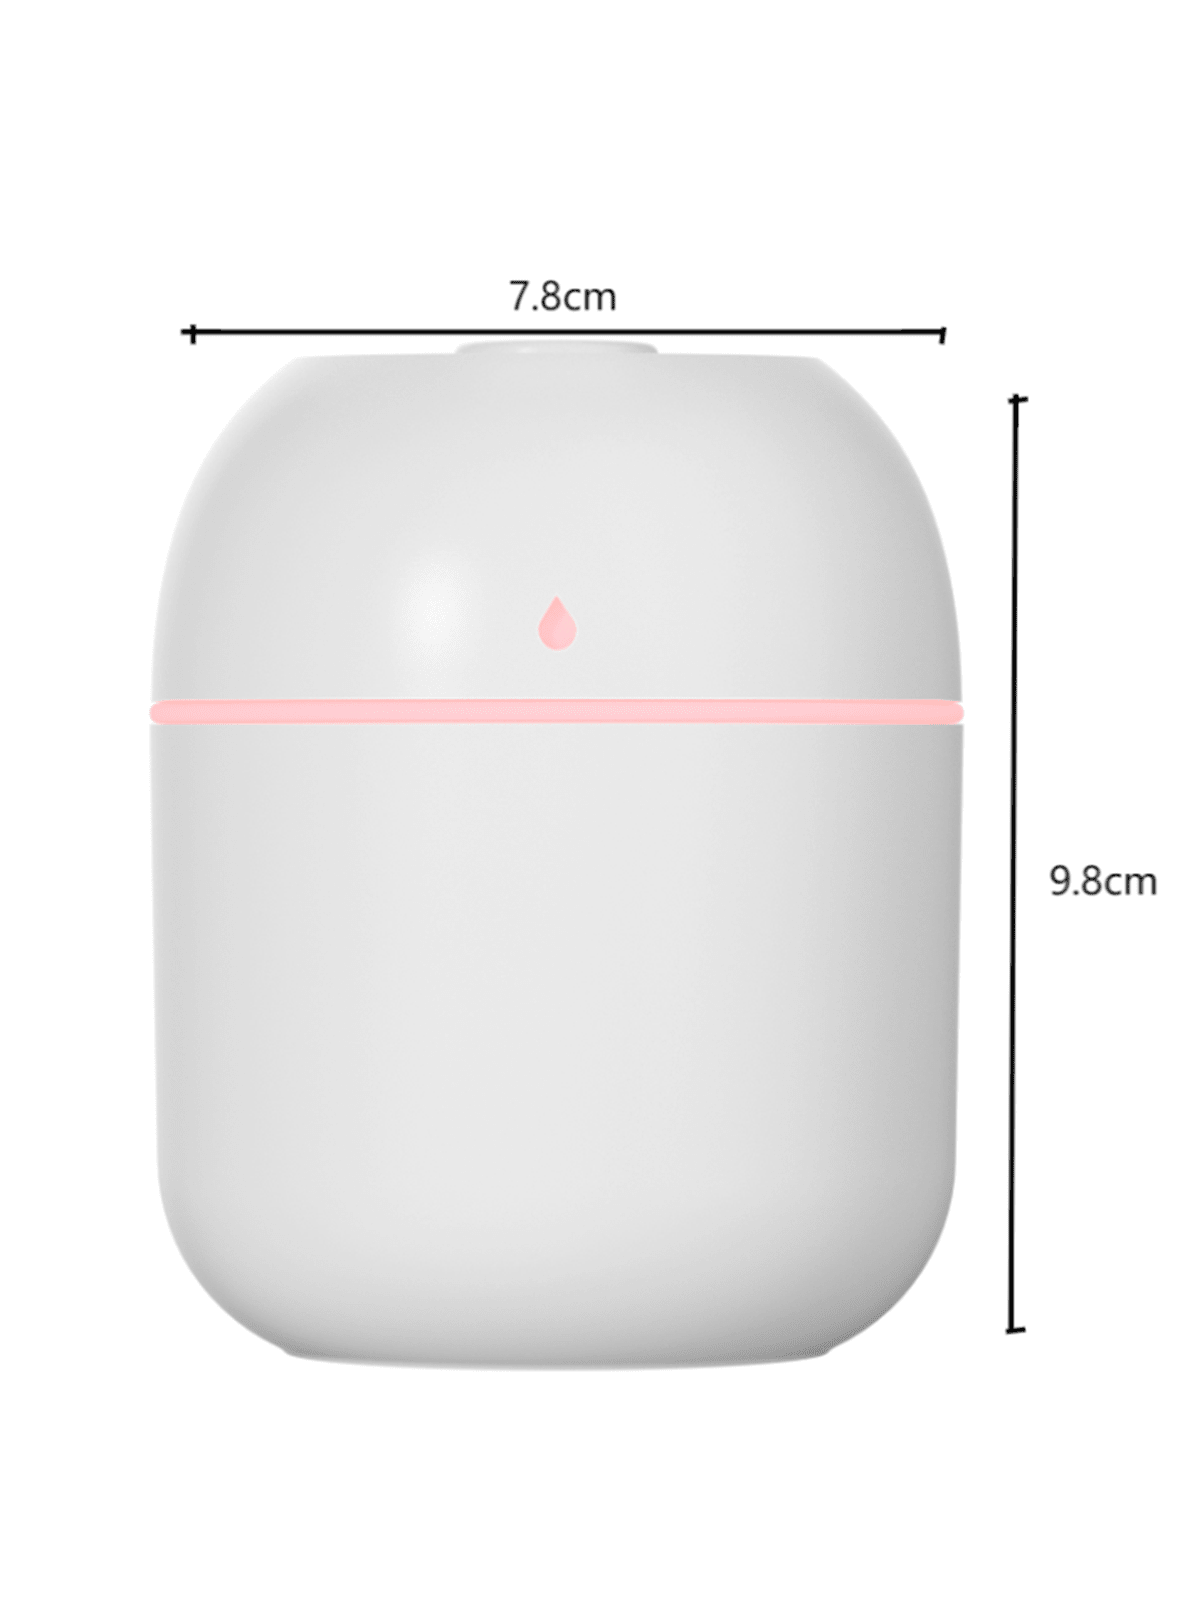 1pc Portable Mini Usb Desktop Humidifier With 7-color Night Light, Atomizer, Moisturizing Instrument, Aroma Diffuser, Air Purifier, Suitable For Desktop Office, Bedroom-Pink-9